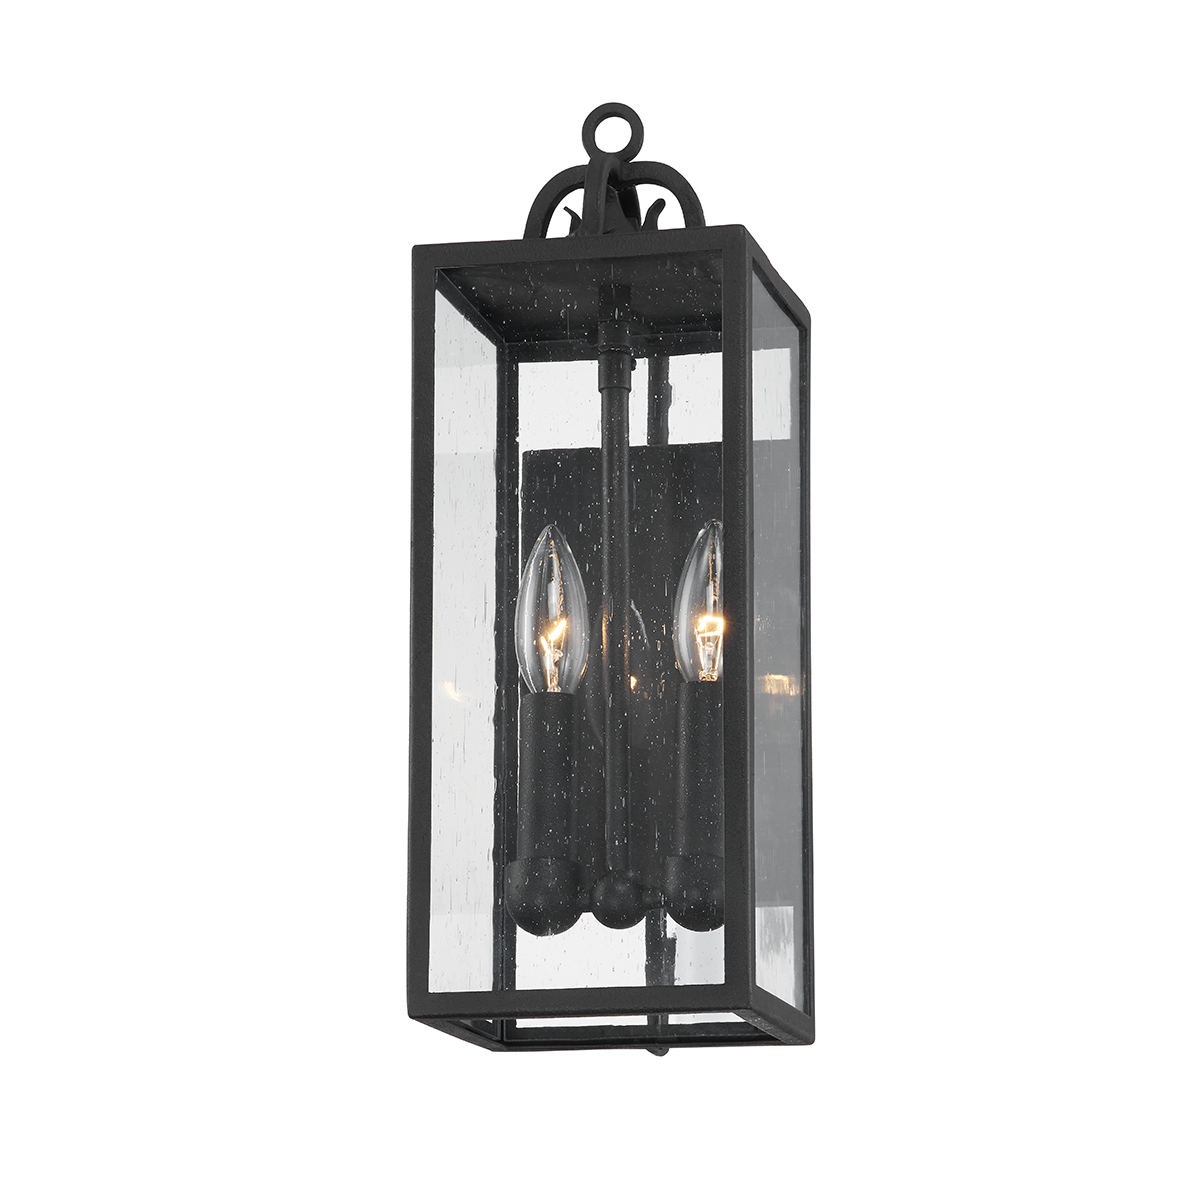 Troy Lighting 2 LIGHT EXTERIOR WALL SCONCE B2061 Outdoor l Wall Troy Lighting FORGED IRON  